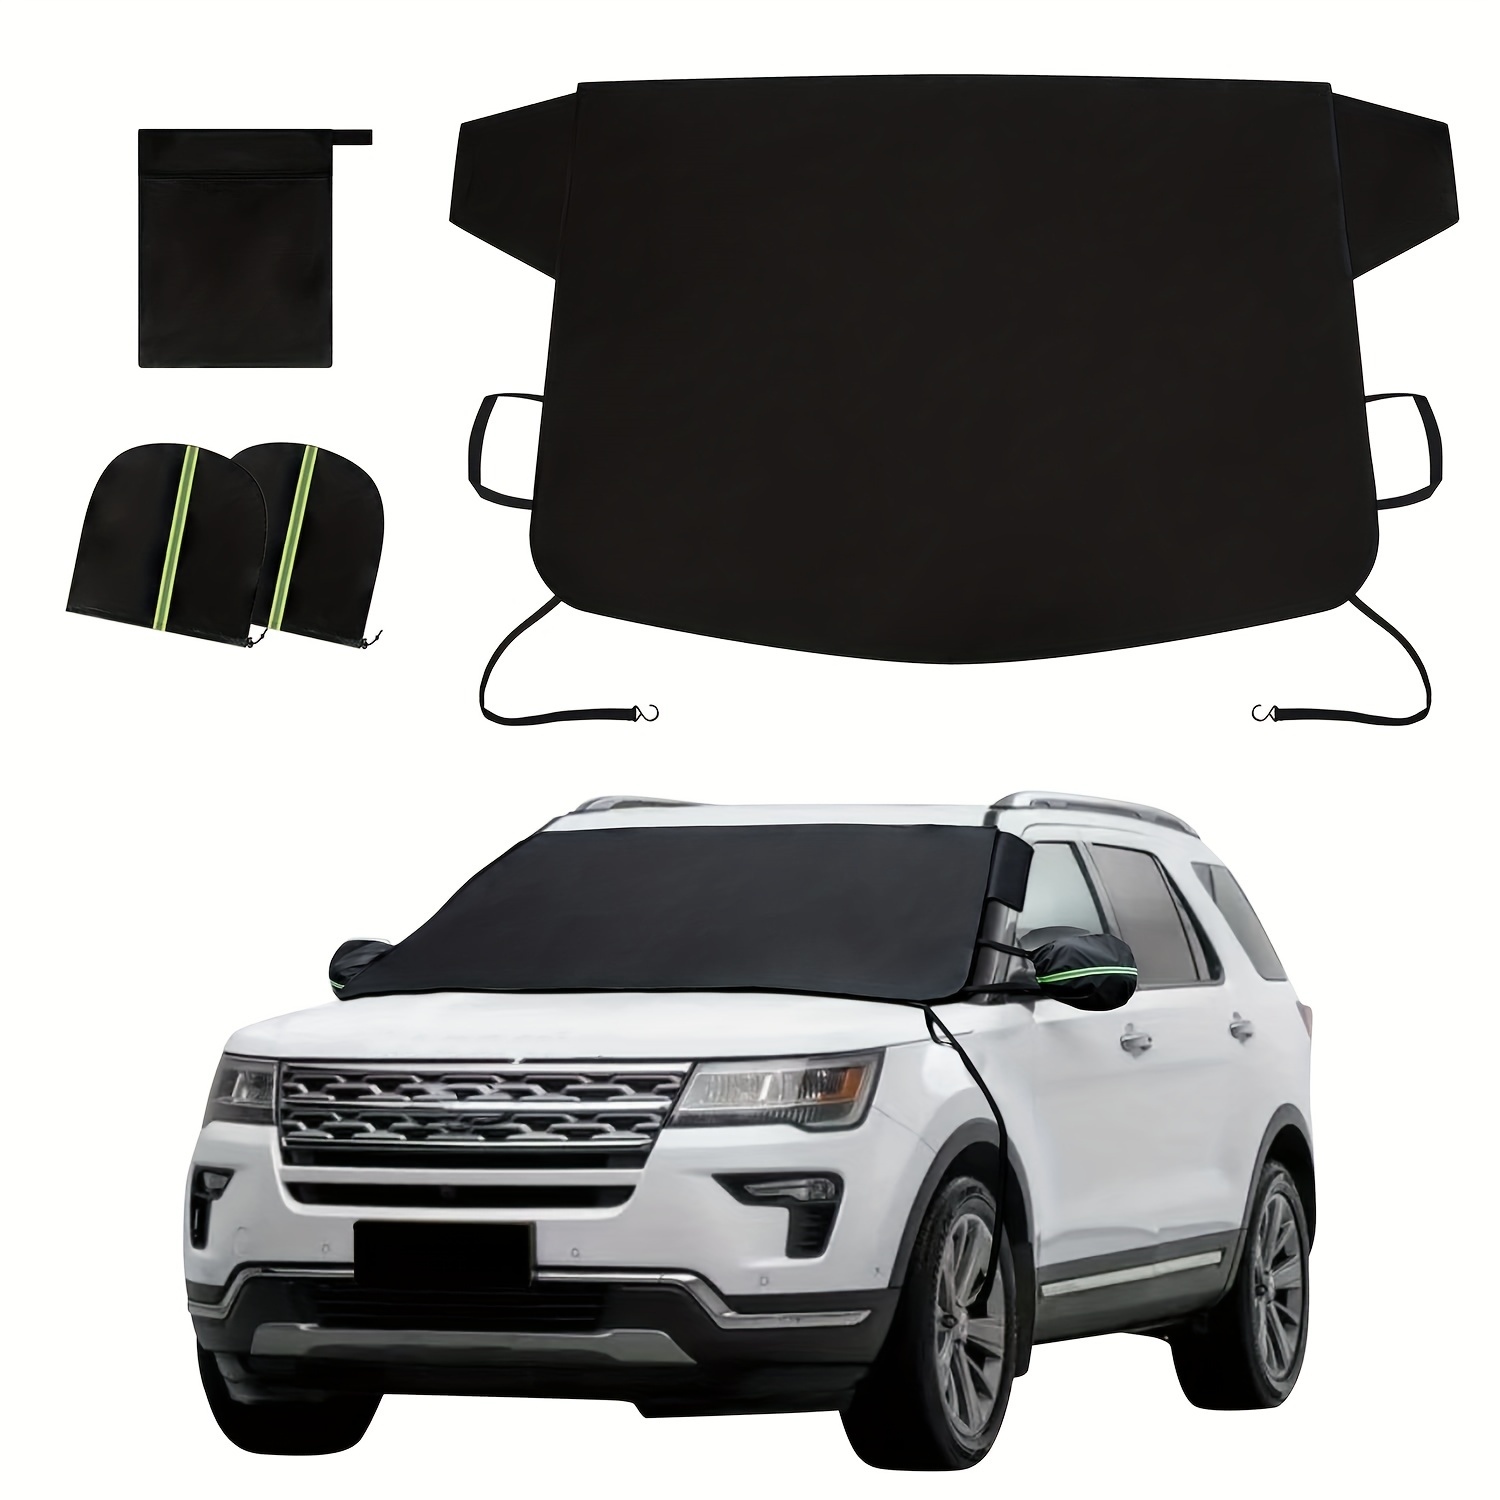 Windshield Cover For Ice And Snow, Windshield Snow Cover, Car Windshield  Snow Cover, Fits Most Cars Trucks Vans Suvs, Embedded Magnets